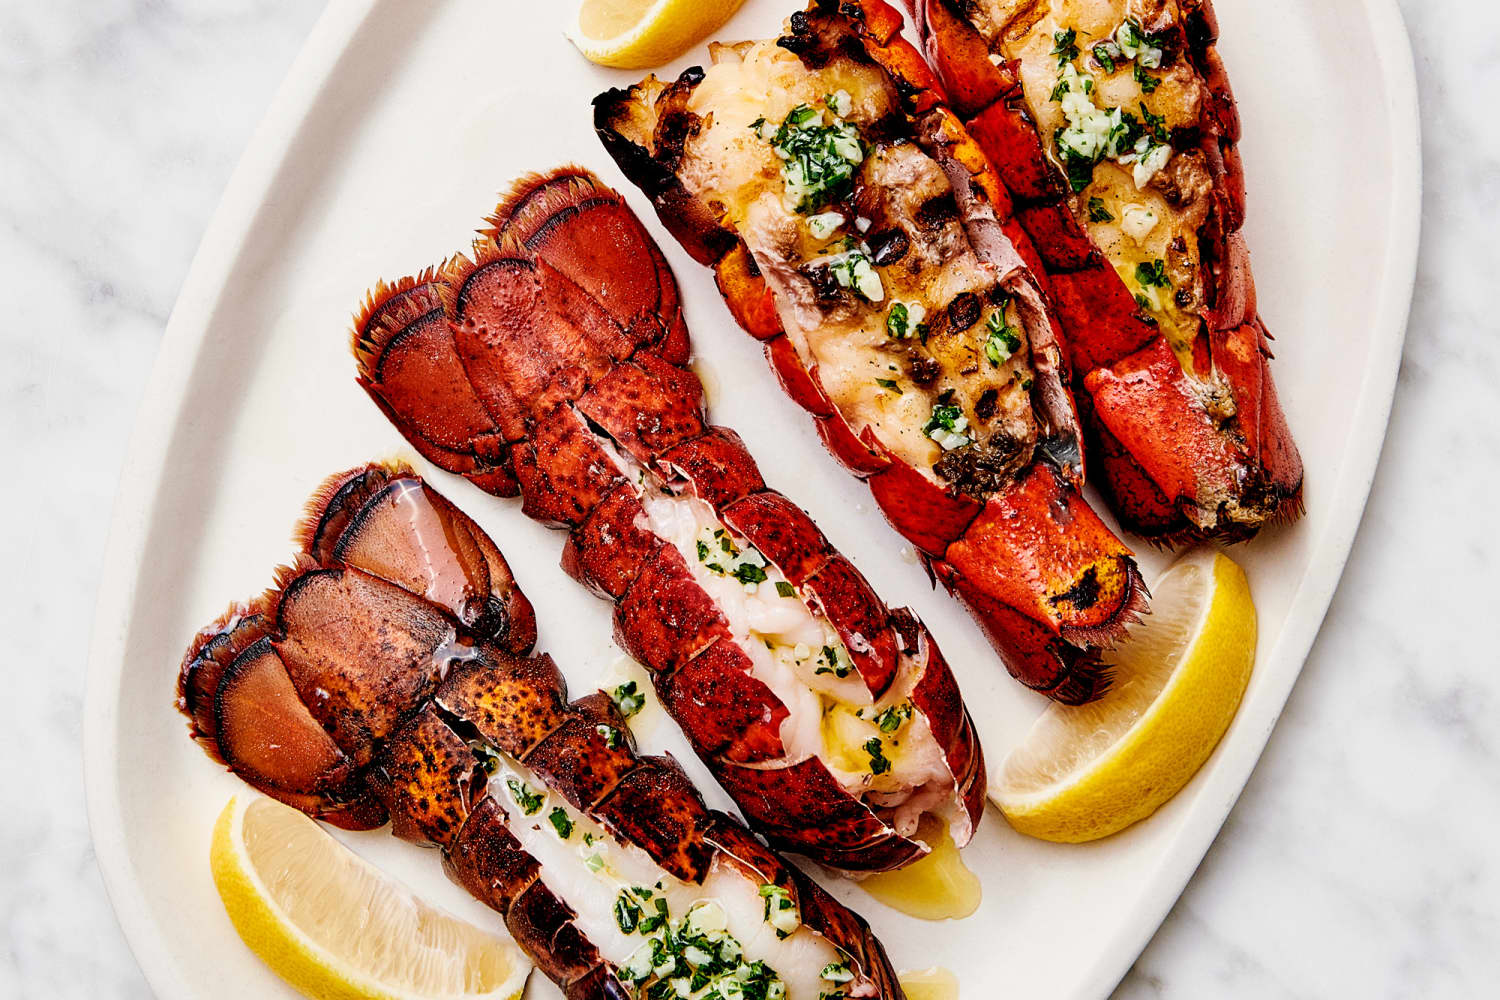 https://cdn.apartmenttherapy.info/image/upload/f_auto,q_auto:eco,c_fill,g_auto,w_1500,ar_3:2/k%2FPhoto%2FRecipes%2F2022-11-how-to-cook-lobster-tails%20%2FHOW-TO-COOK-LOBSTER-TAILS-200